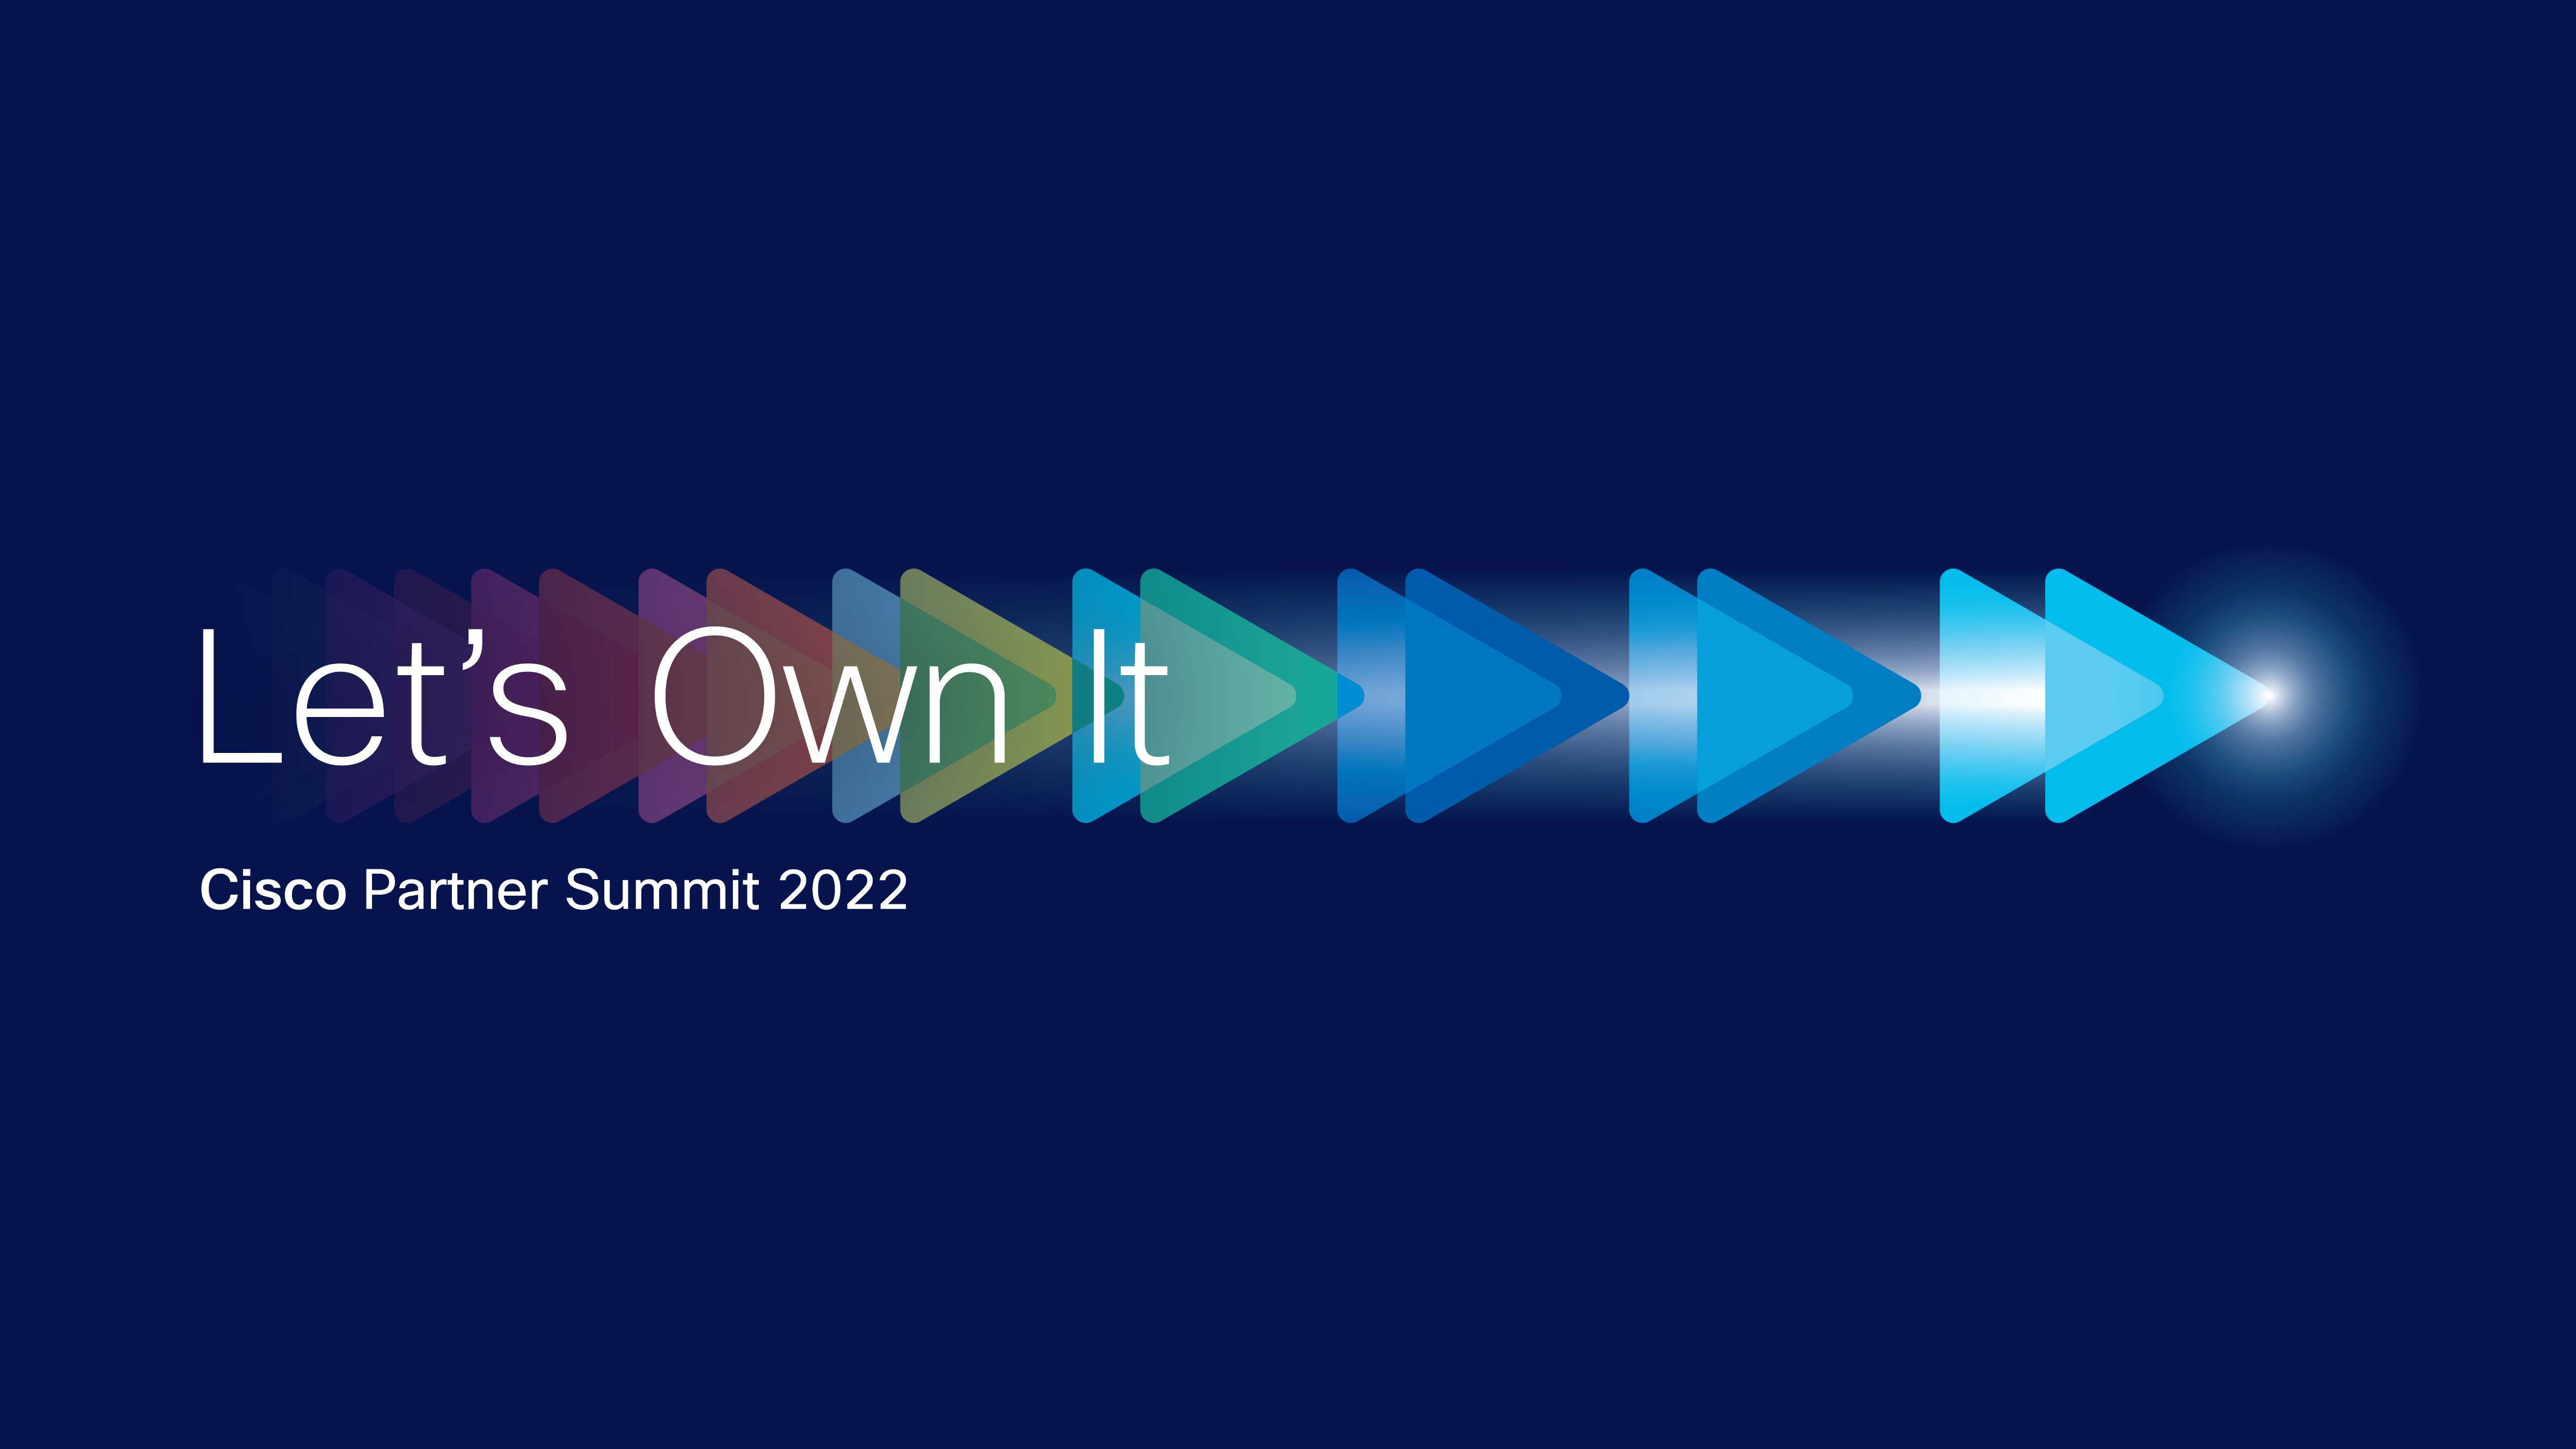 Cisco Equips Partners to Own New Opportunities Through Programs and Innovation Introduced at  27th Annual Cisco Partner Summit